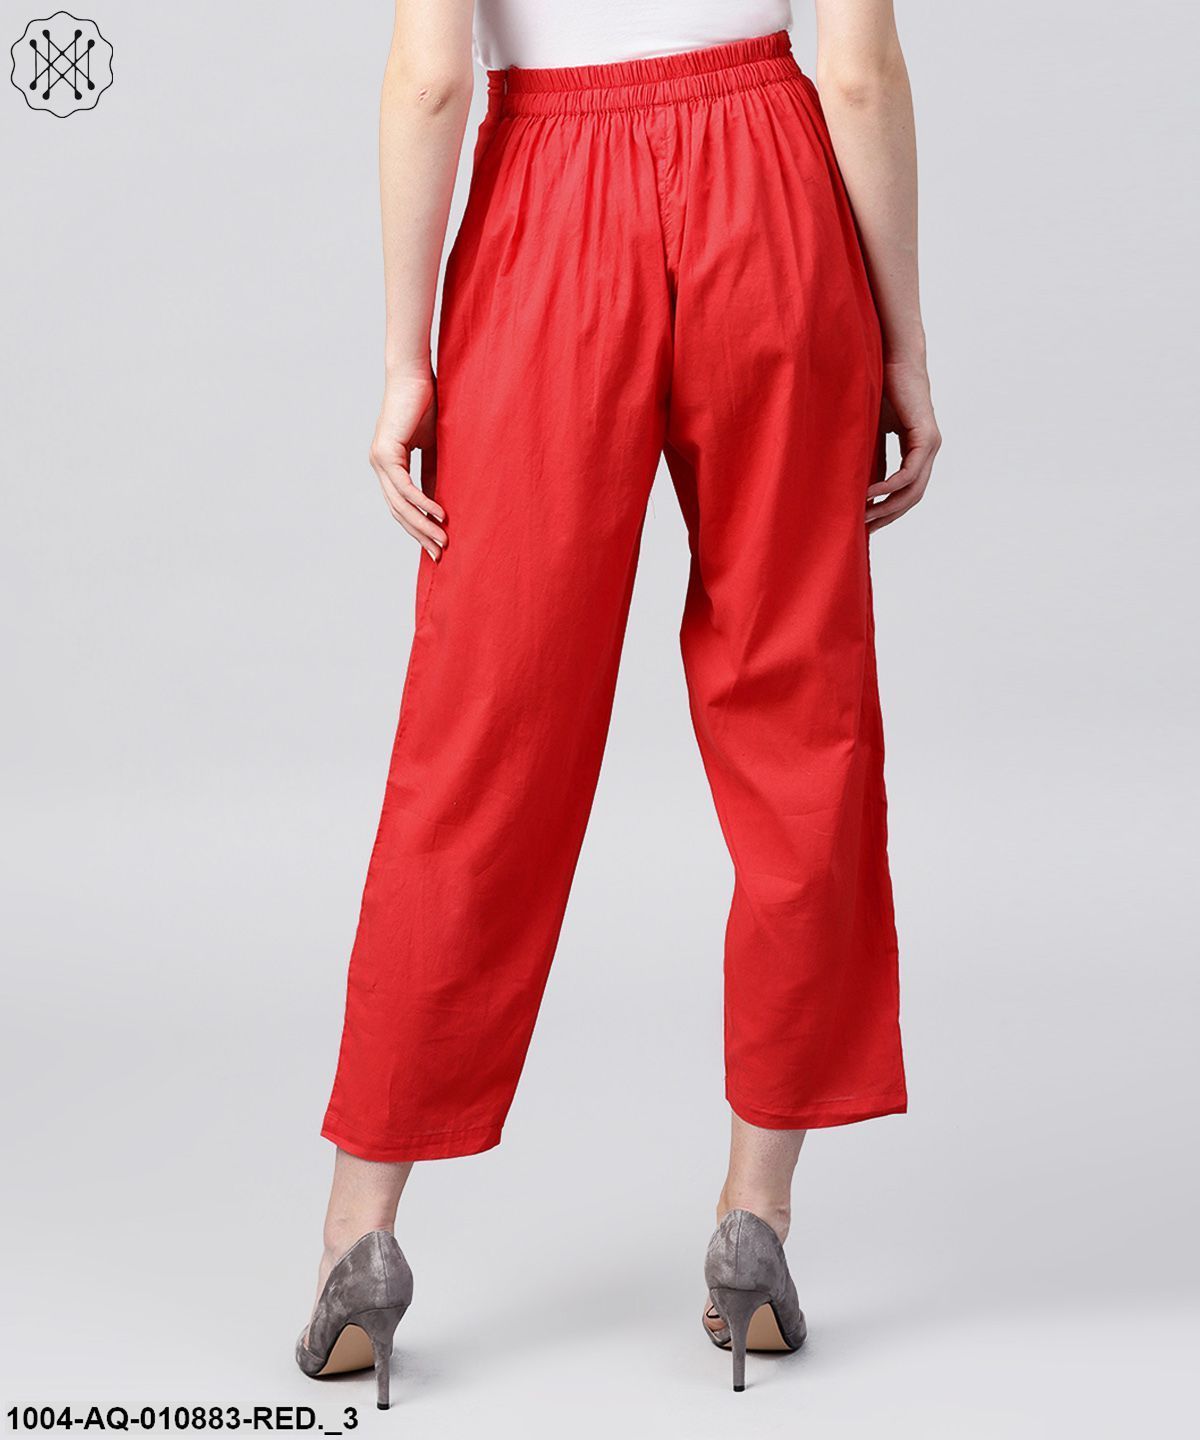 Solid Red Ankle Length Cotton Regular Fit Trouser